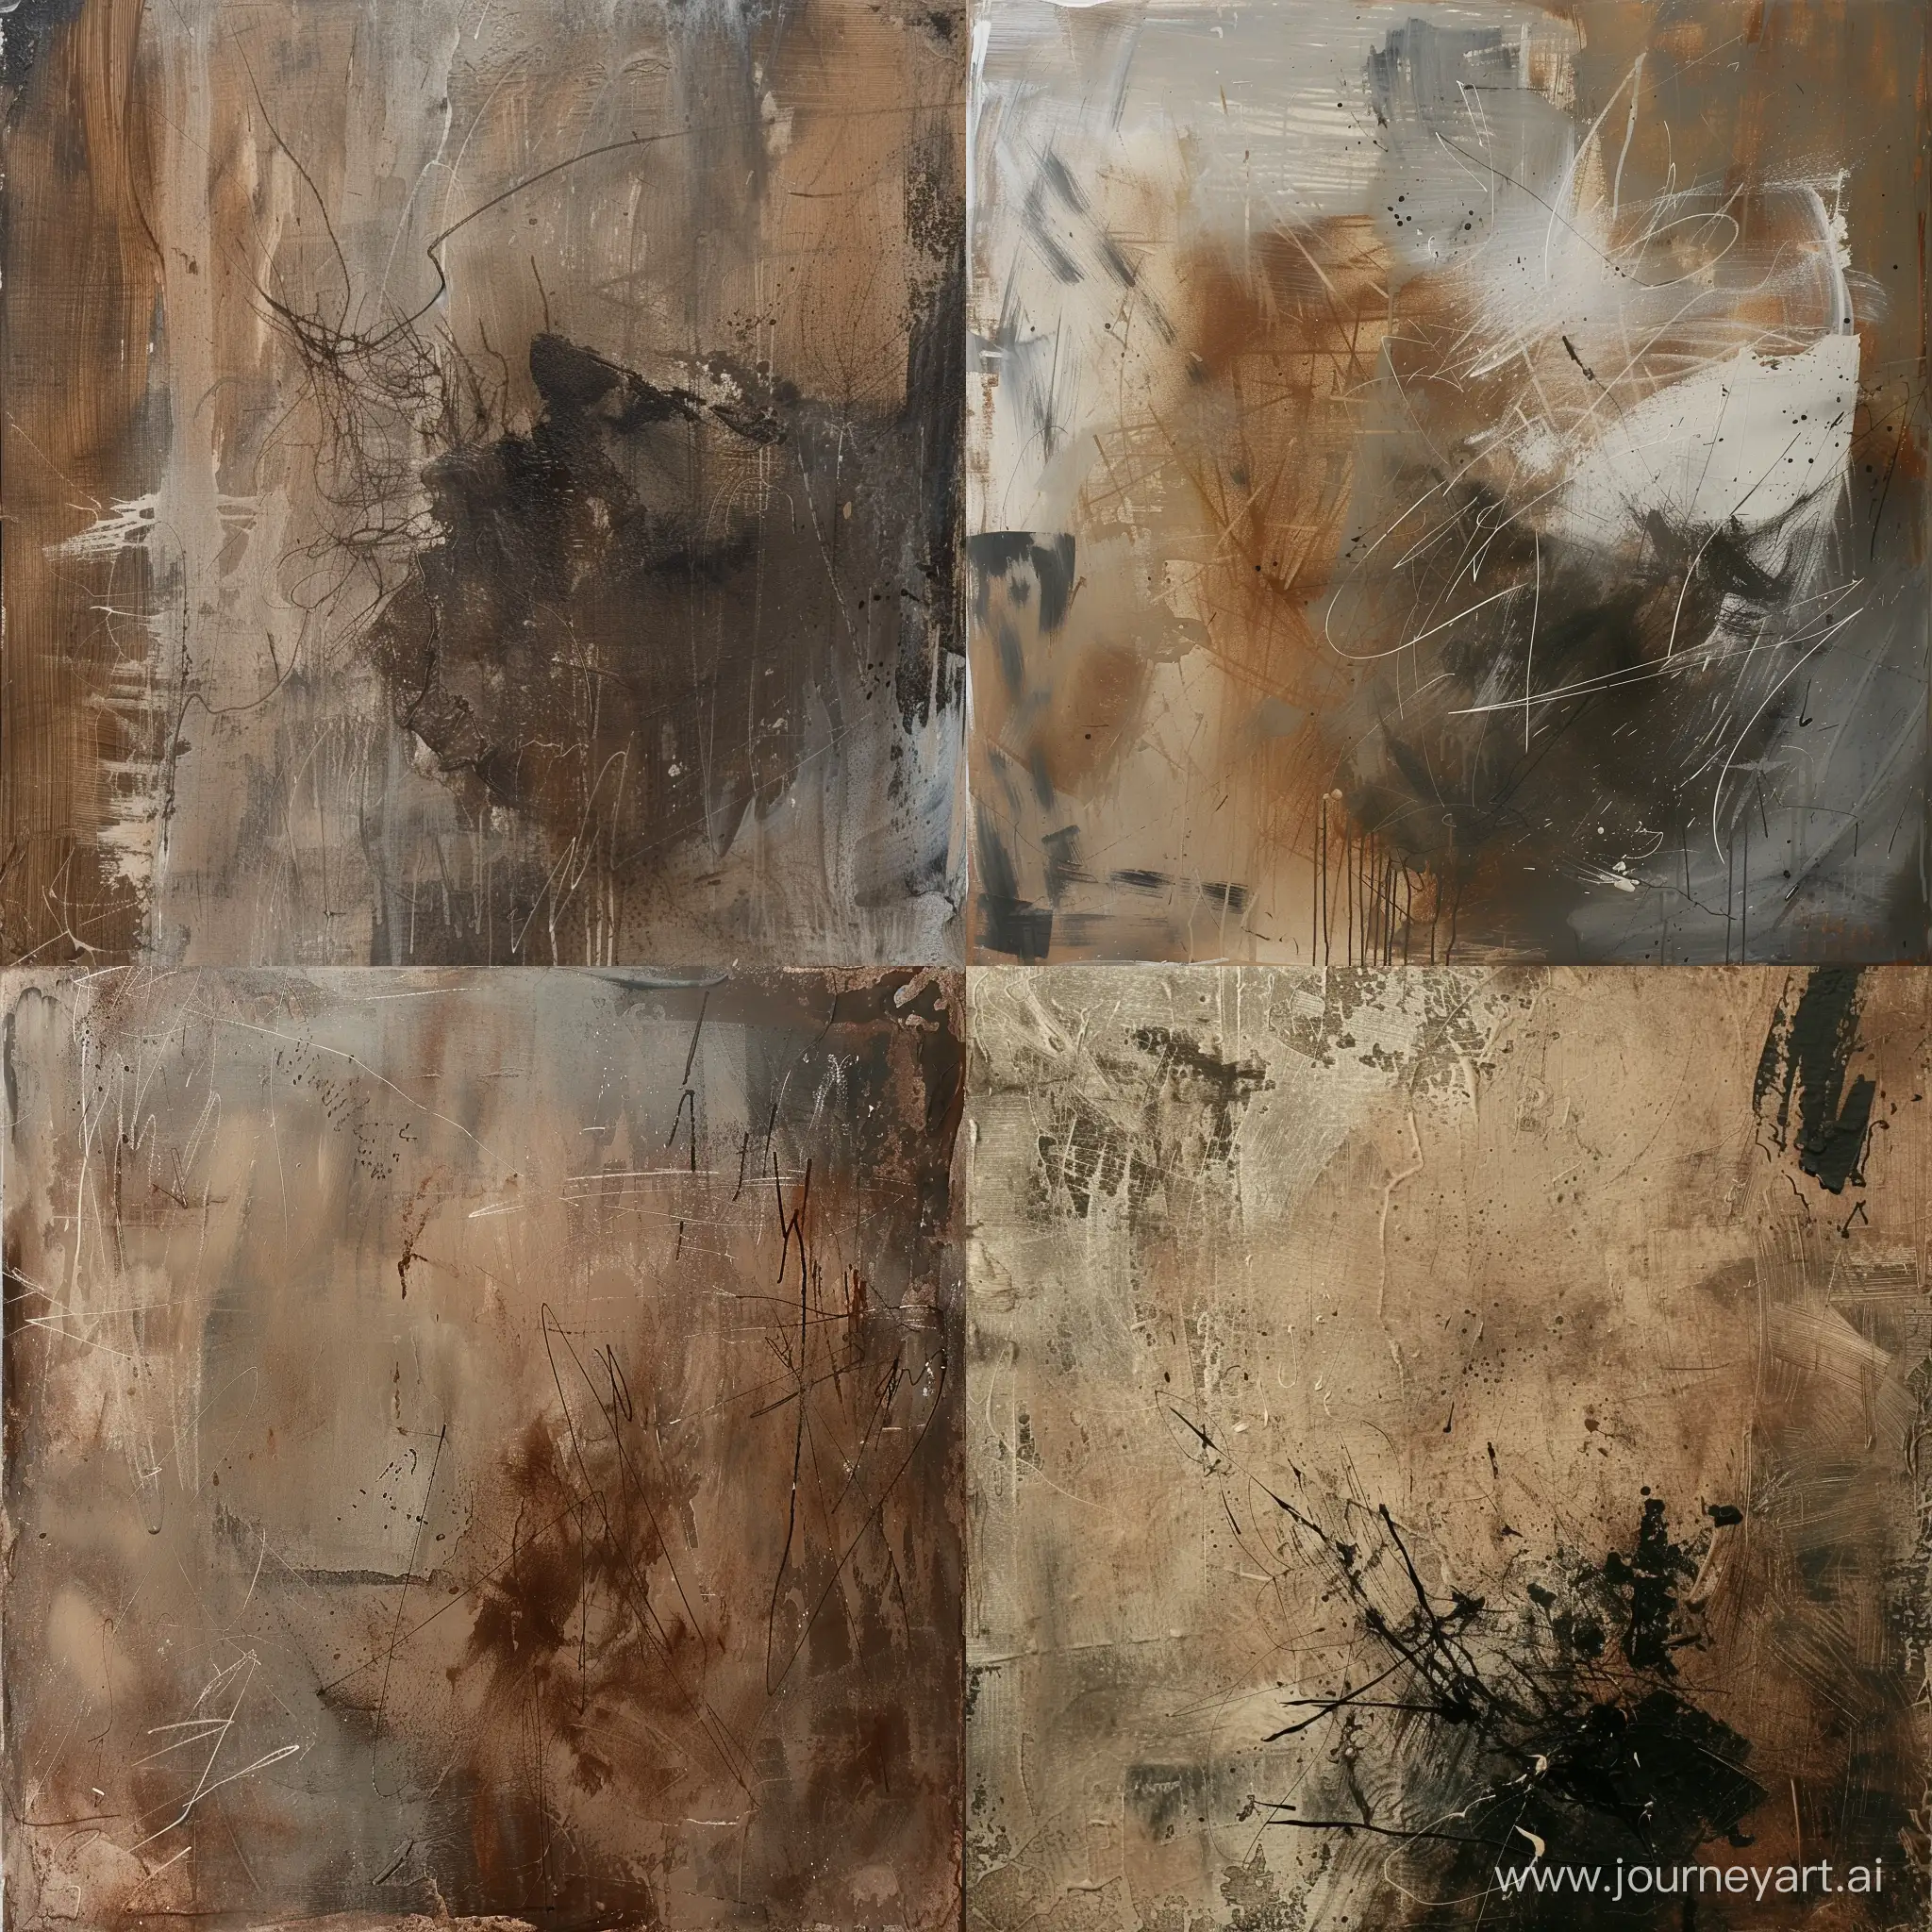 an abstract mix of brown and grey tones with visible brush strokes and scribbles that give it an artistic touch. it appears to be a painted canvas, transgressive art